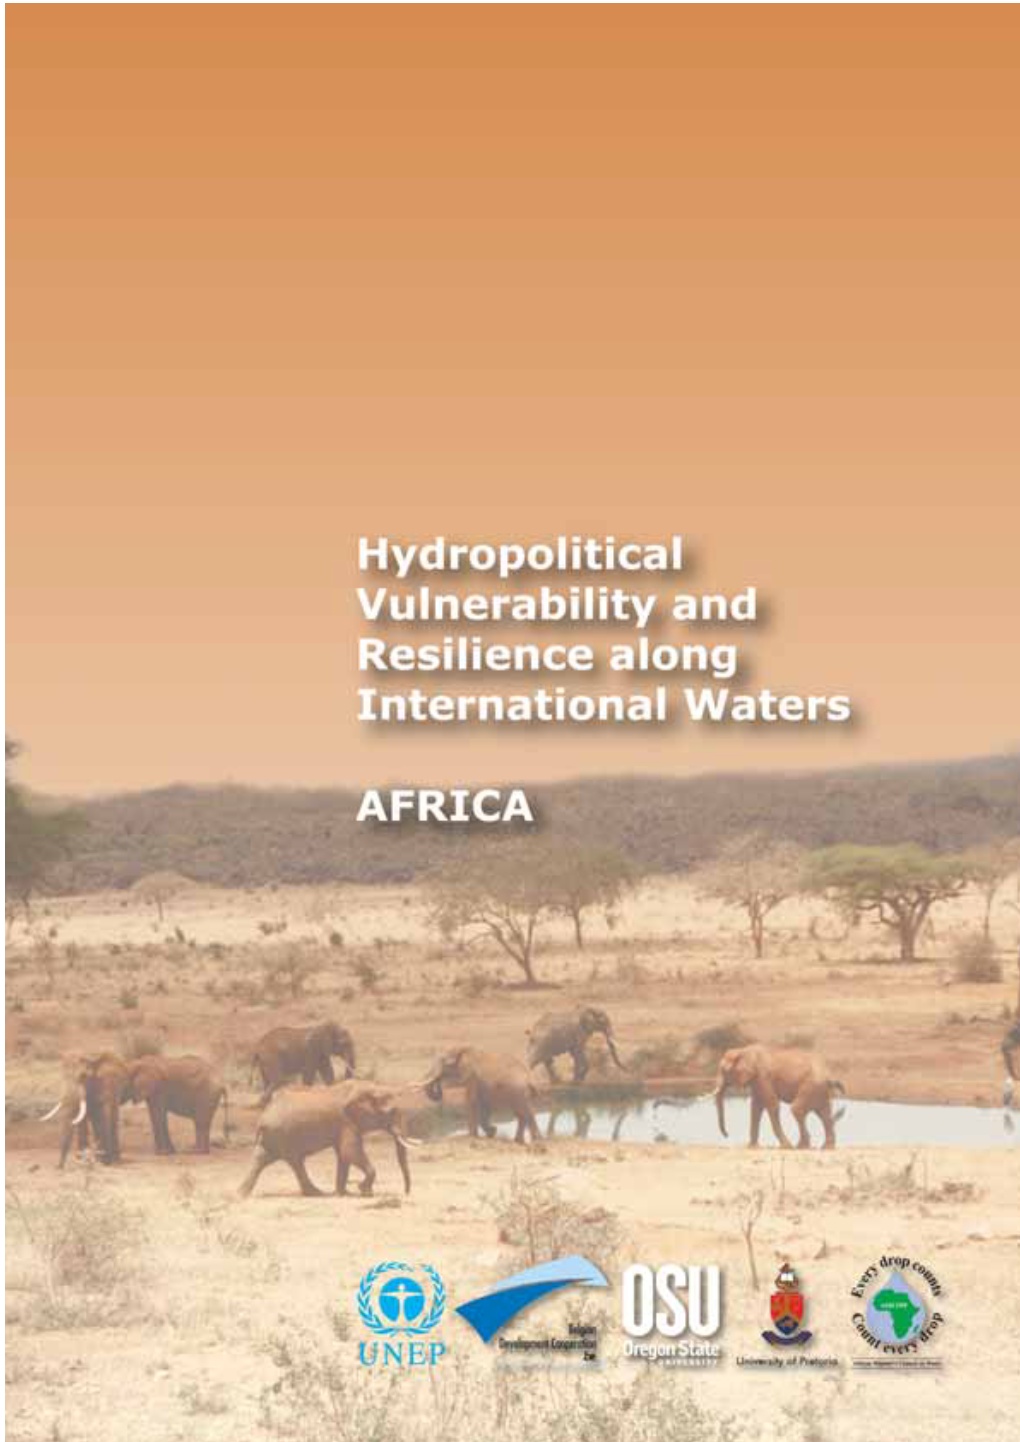 Hydropolitical Vulnerability and Resilience Along International Waters: Africa Is the First of a Five-Part Series of Continental Reports